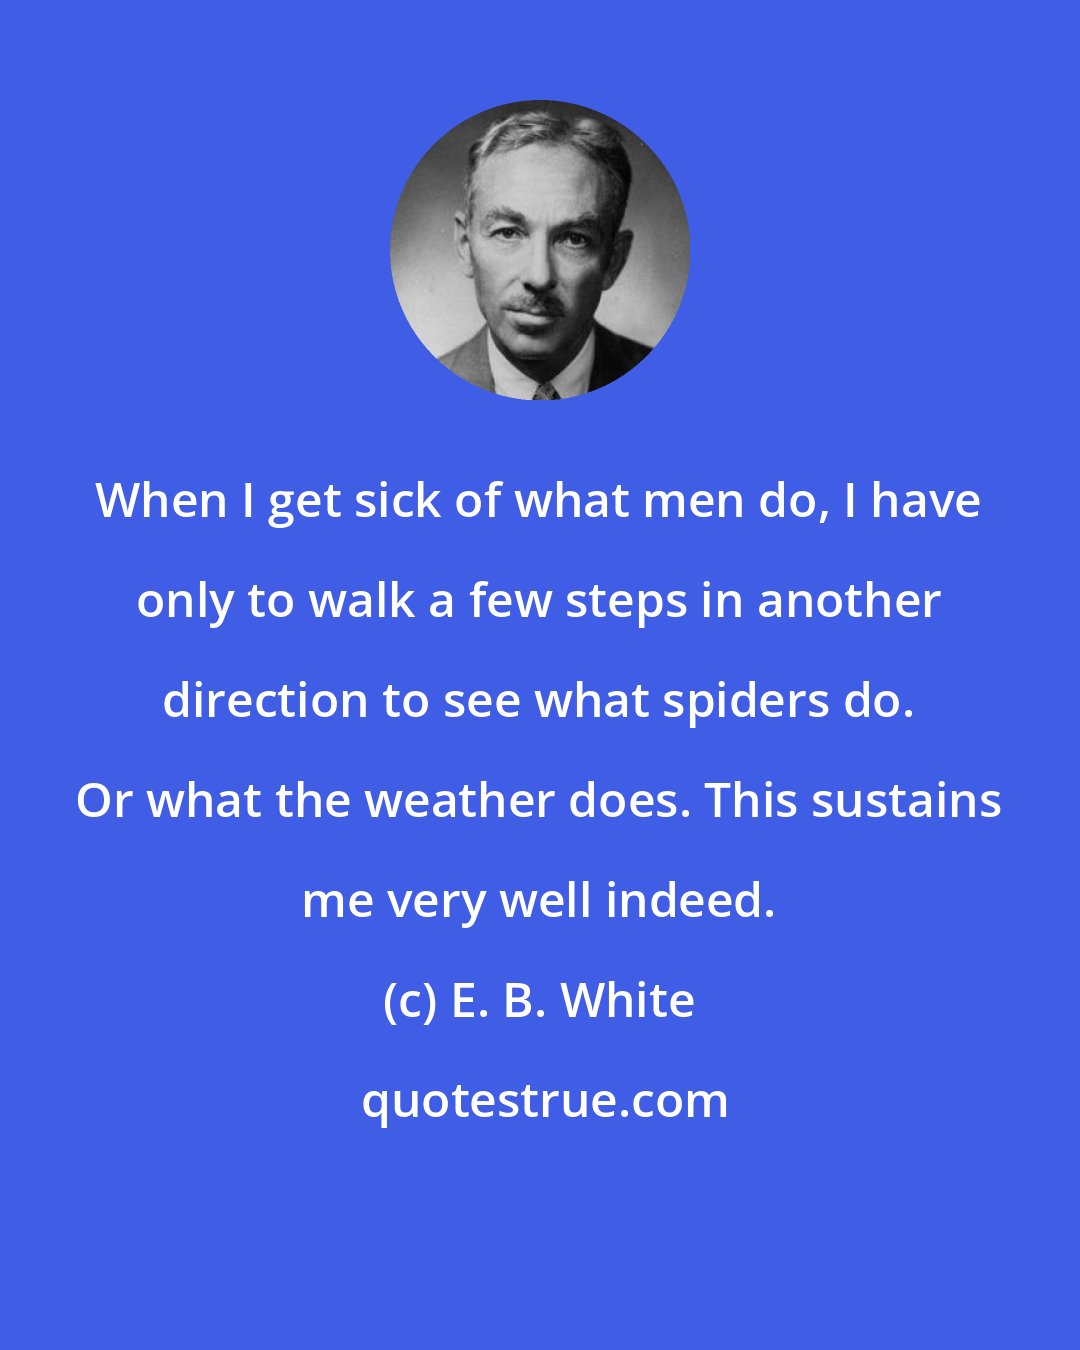 E. B. White: When I get sick of what men do, I have only to walk a few steps in another direction to see what spiders do. Or what the weather does. This sustains me very well indeed.